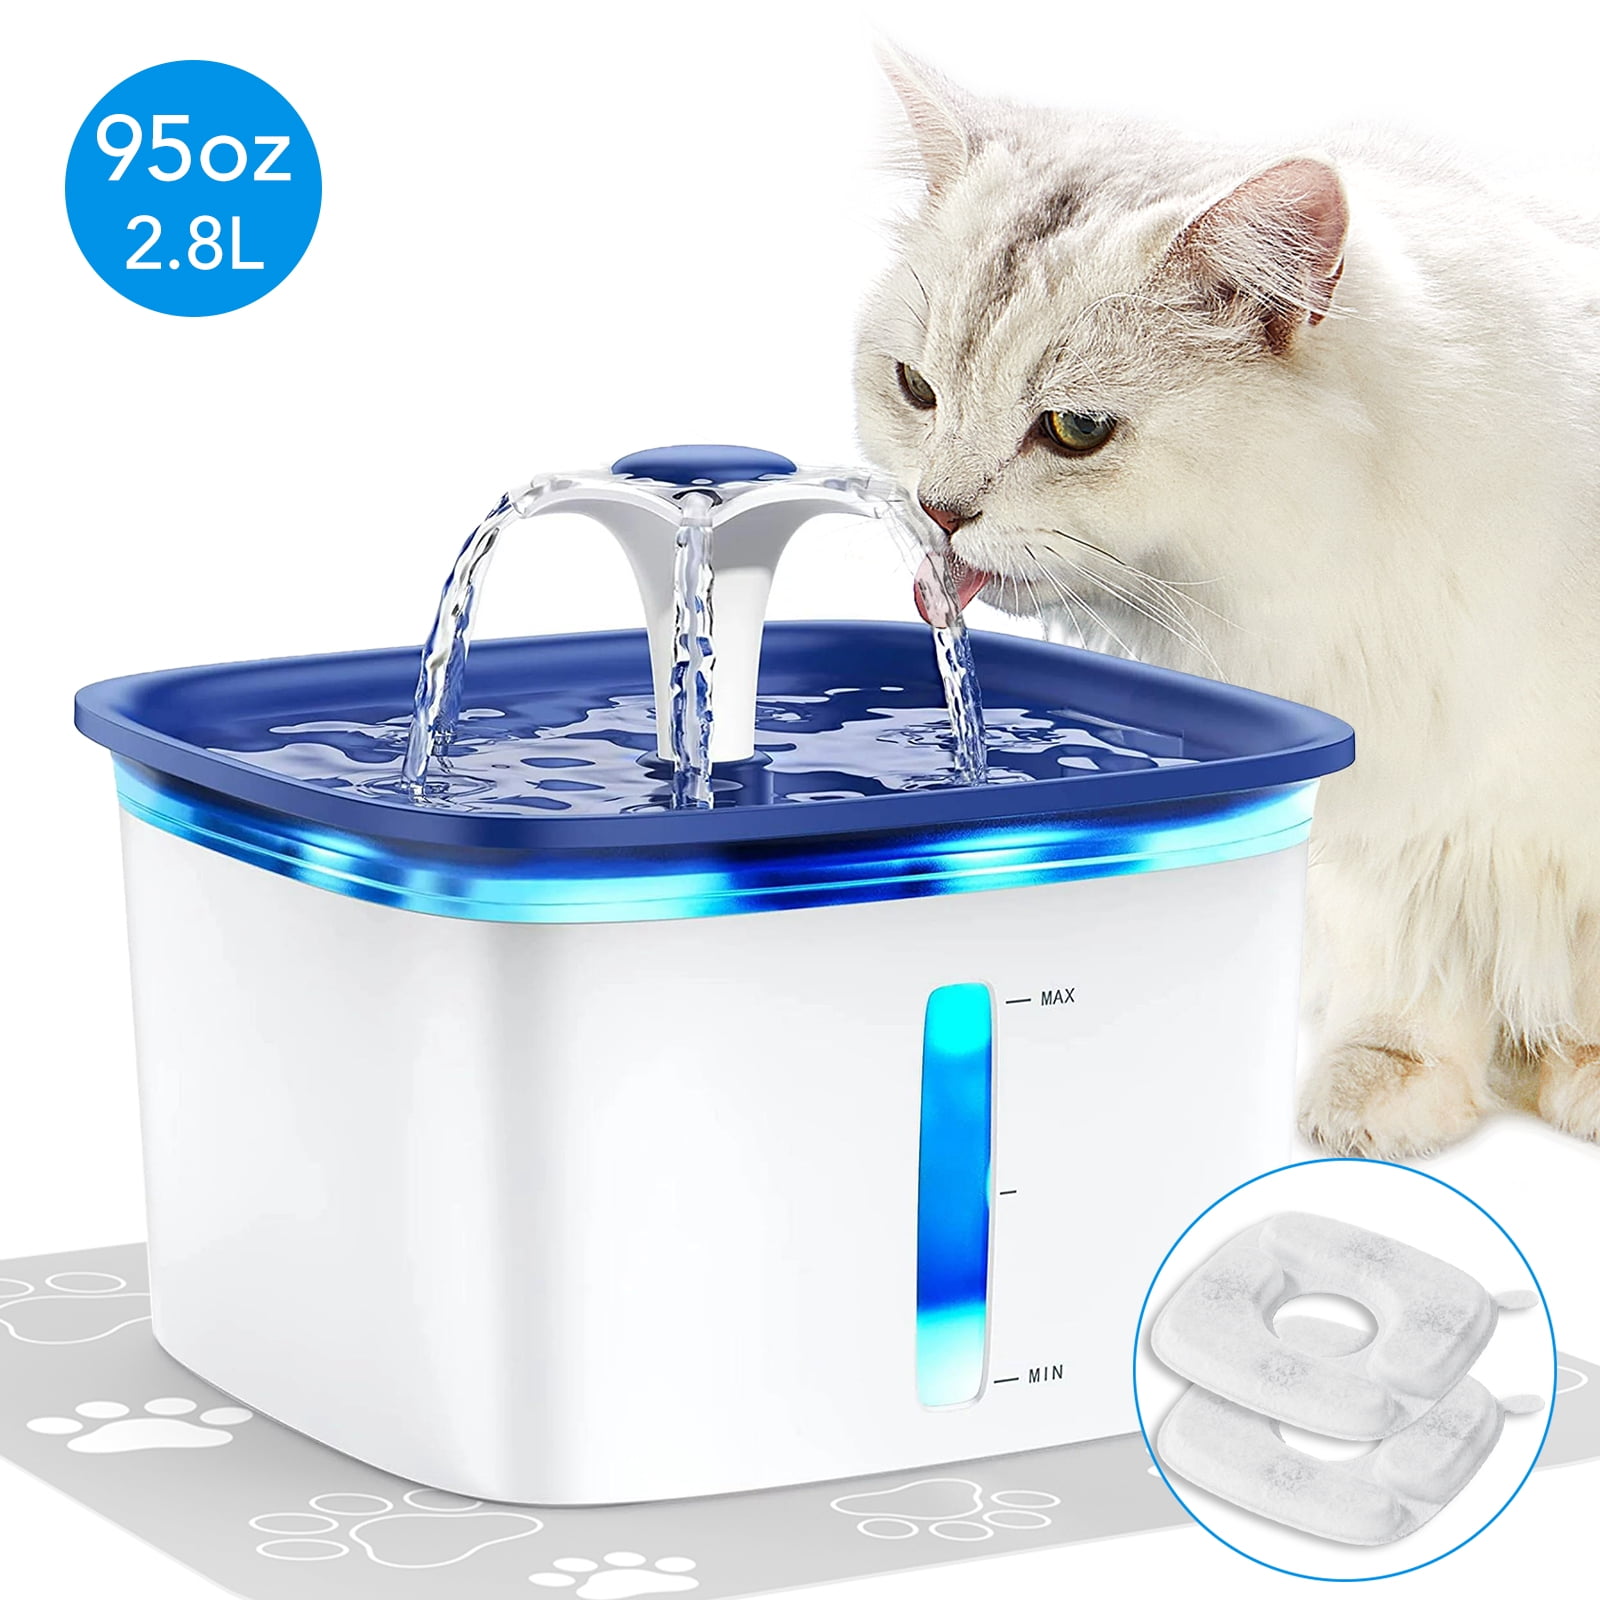 95oz/2.8L Pet Fountain, Cat Dog Water Fountain Dispenser with Smart Pump, White & Blue